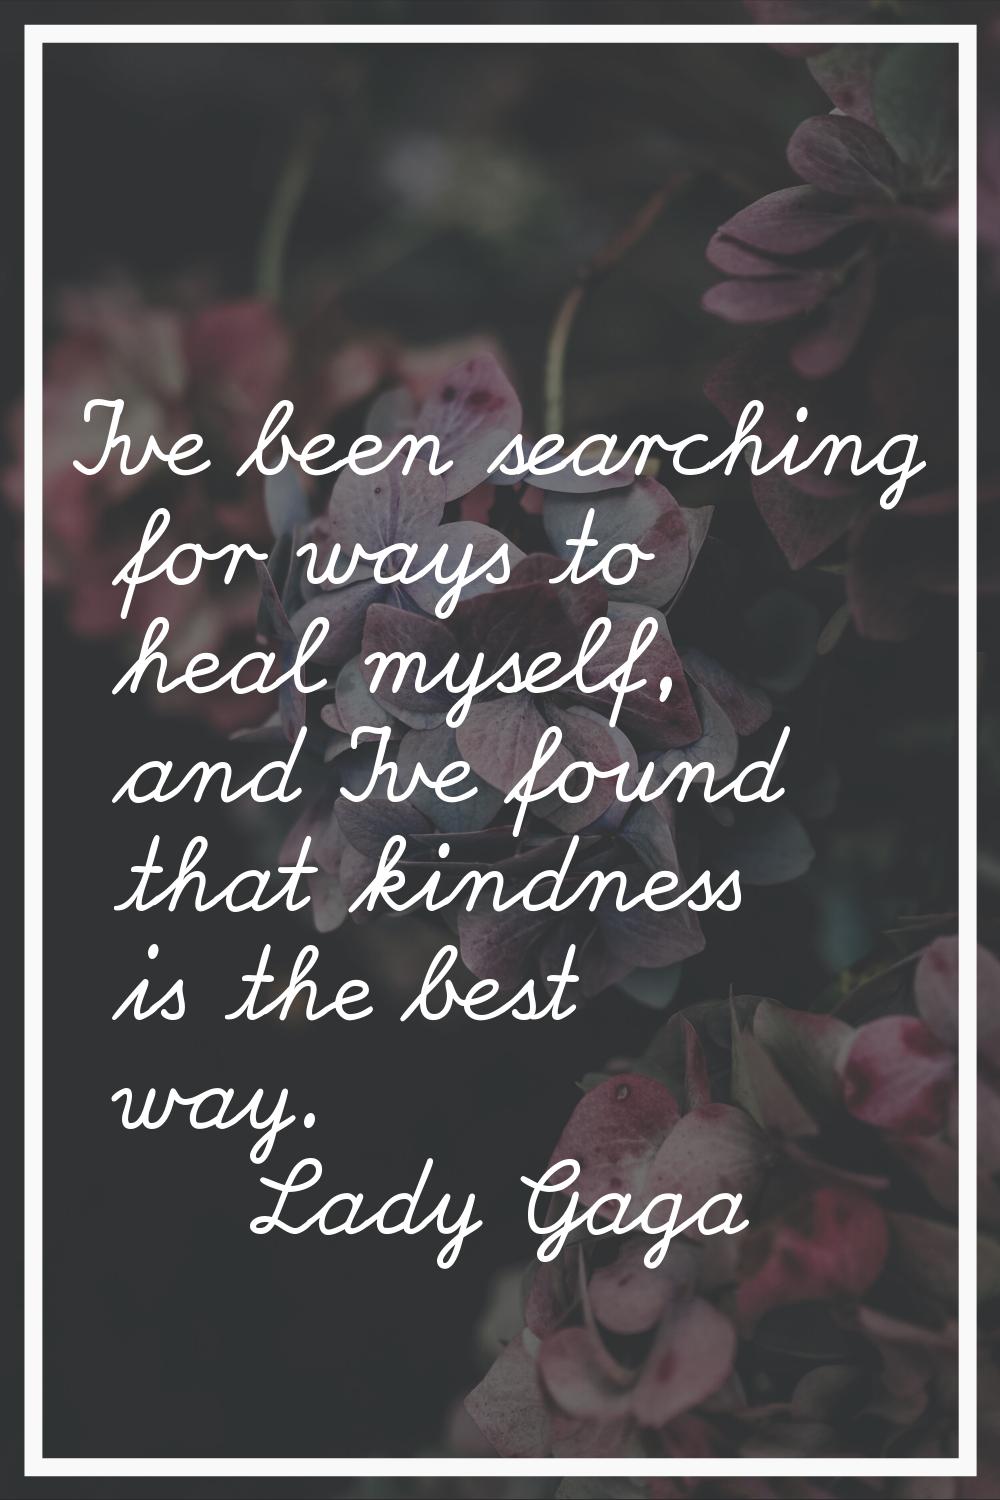 I've been searching for ways to heal myself, and I've found that kindness is the best way.